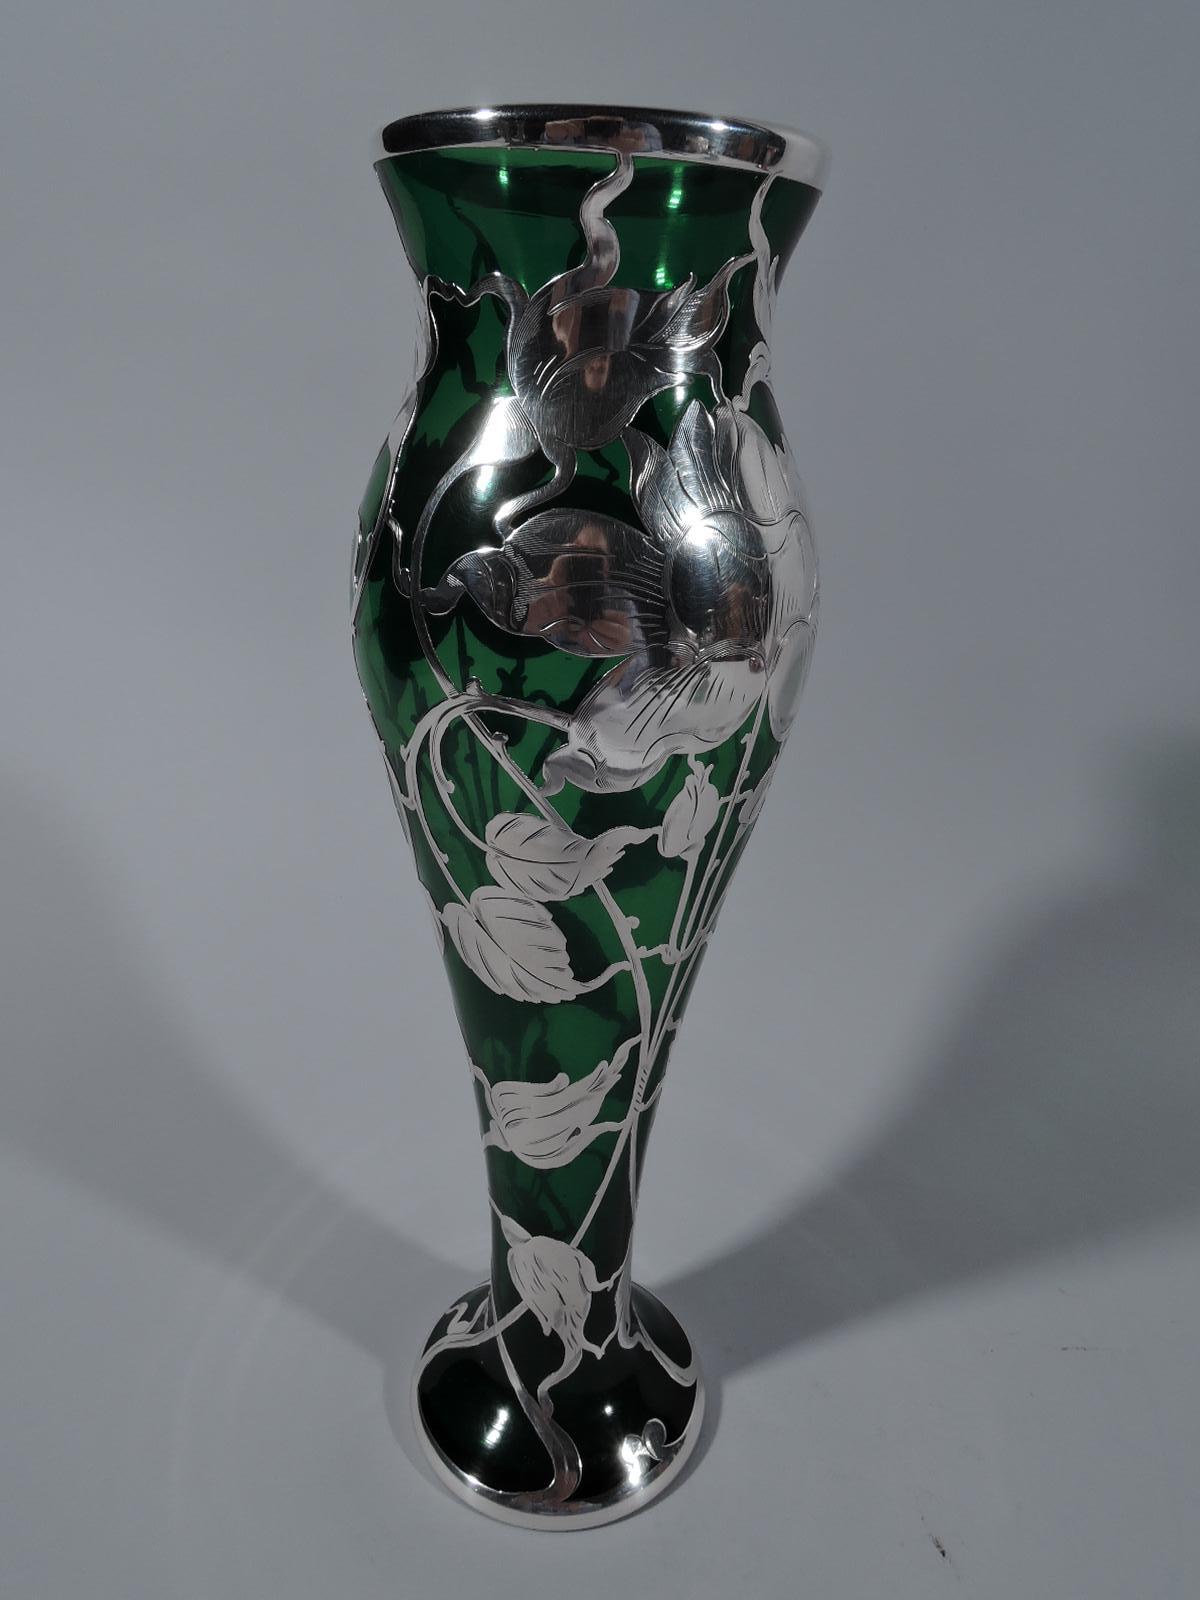 Turn of the century American Art Nouveau green glass vase with engraved silver overlay. Narrow and graceful baluster overlaid with loose, semi-abstract flowers and entwined stems. Armorial cartouche engraved with script monogram.